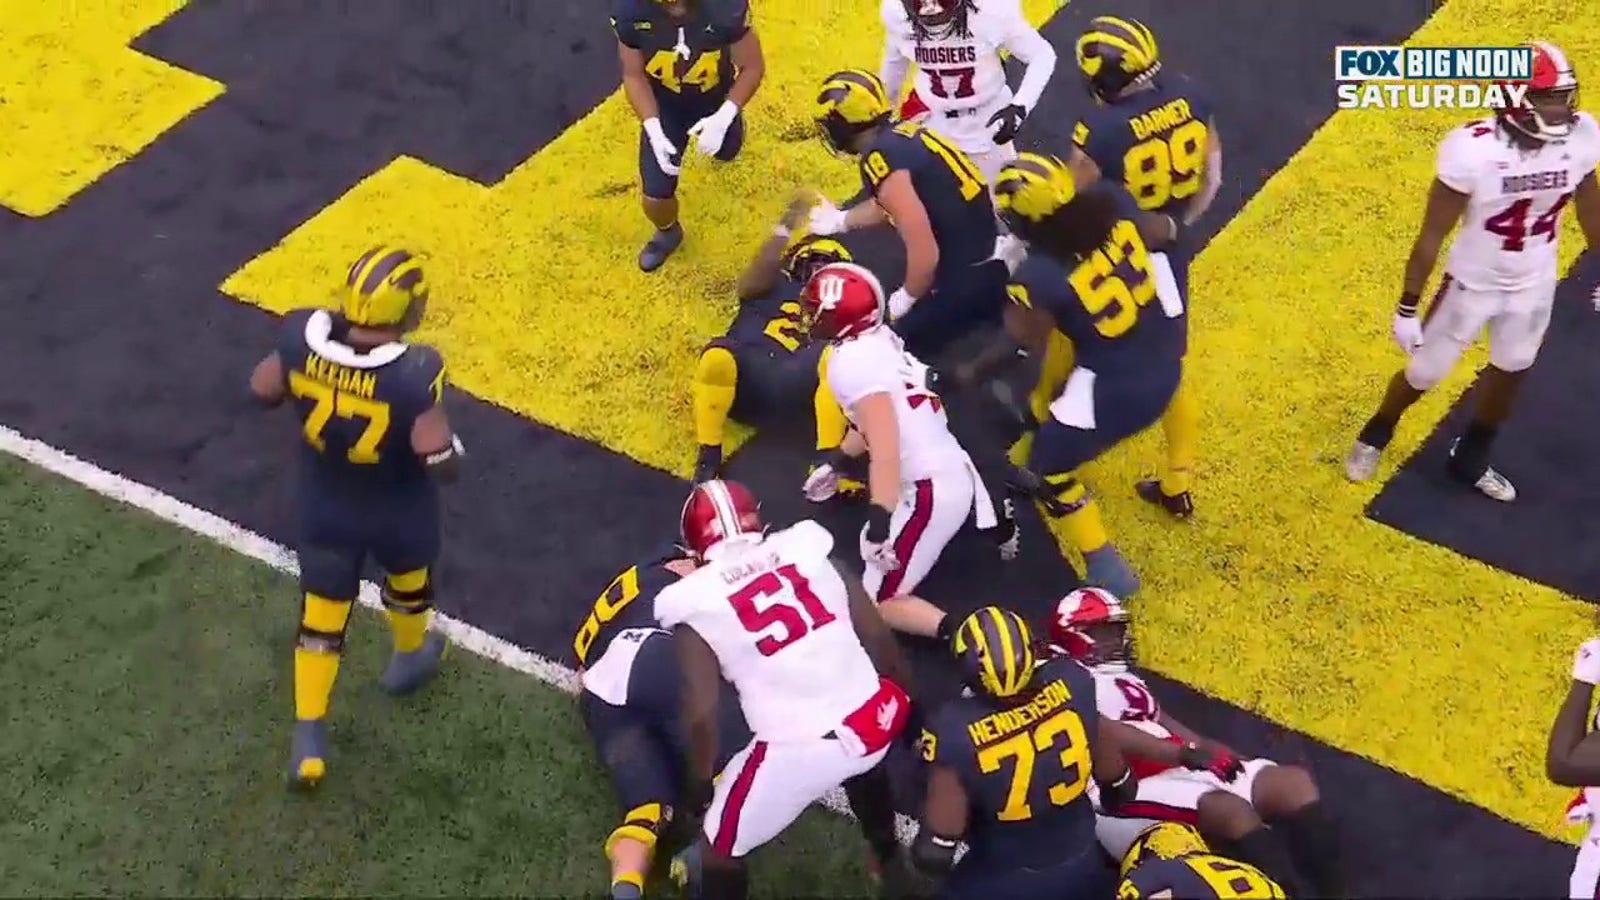 Blake Corum punches in his second TD of the half to extend Michigan's lead vs. Indiana